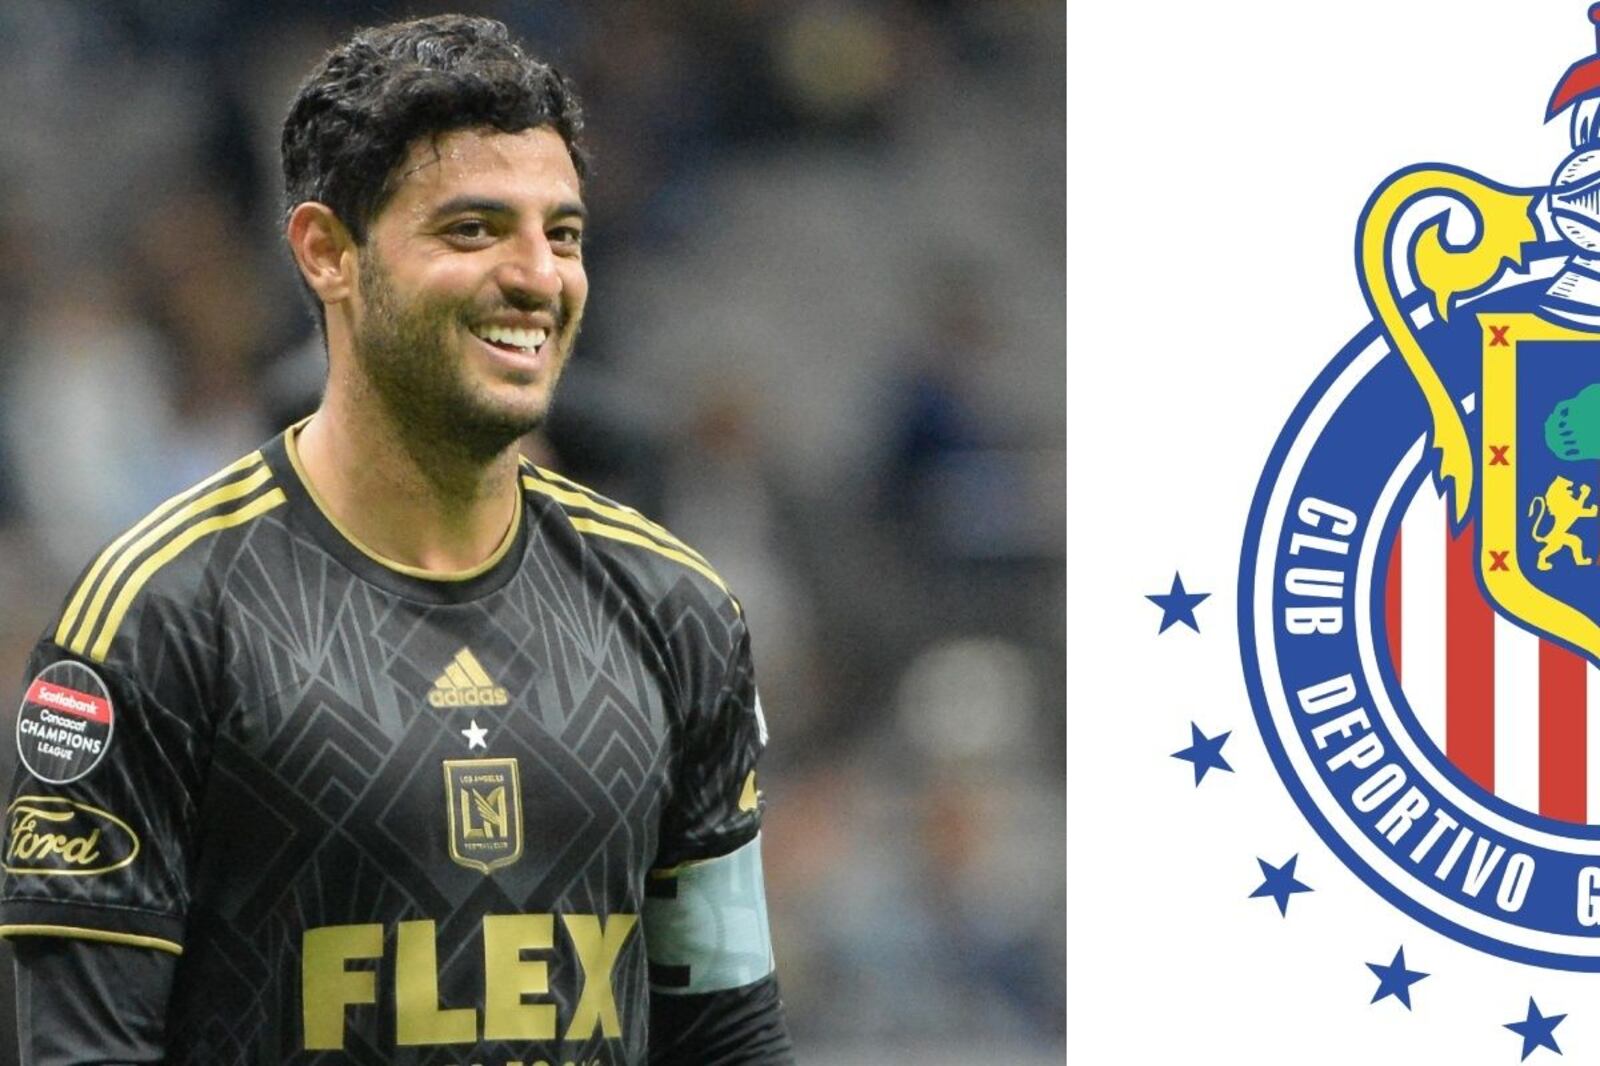 Welcome to Chivas Carlos Vela, the signing that has surprised all of Mexico